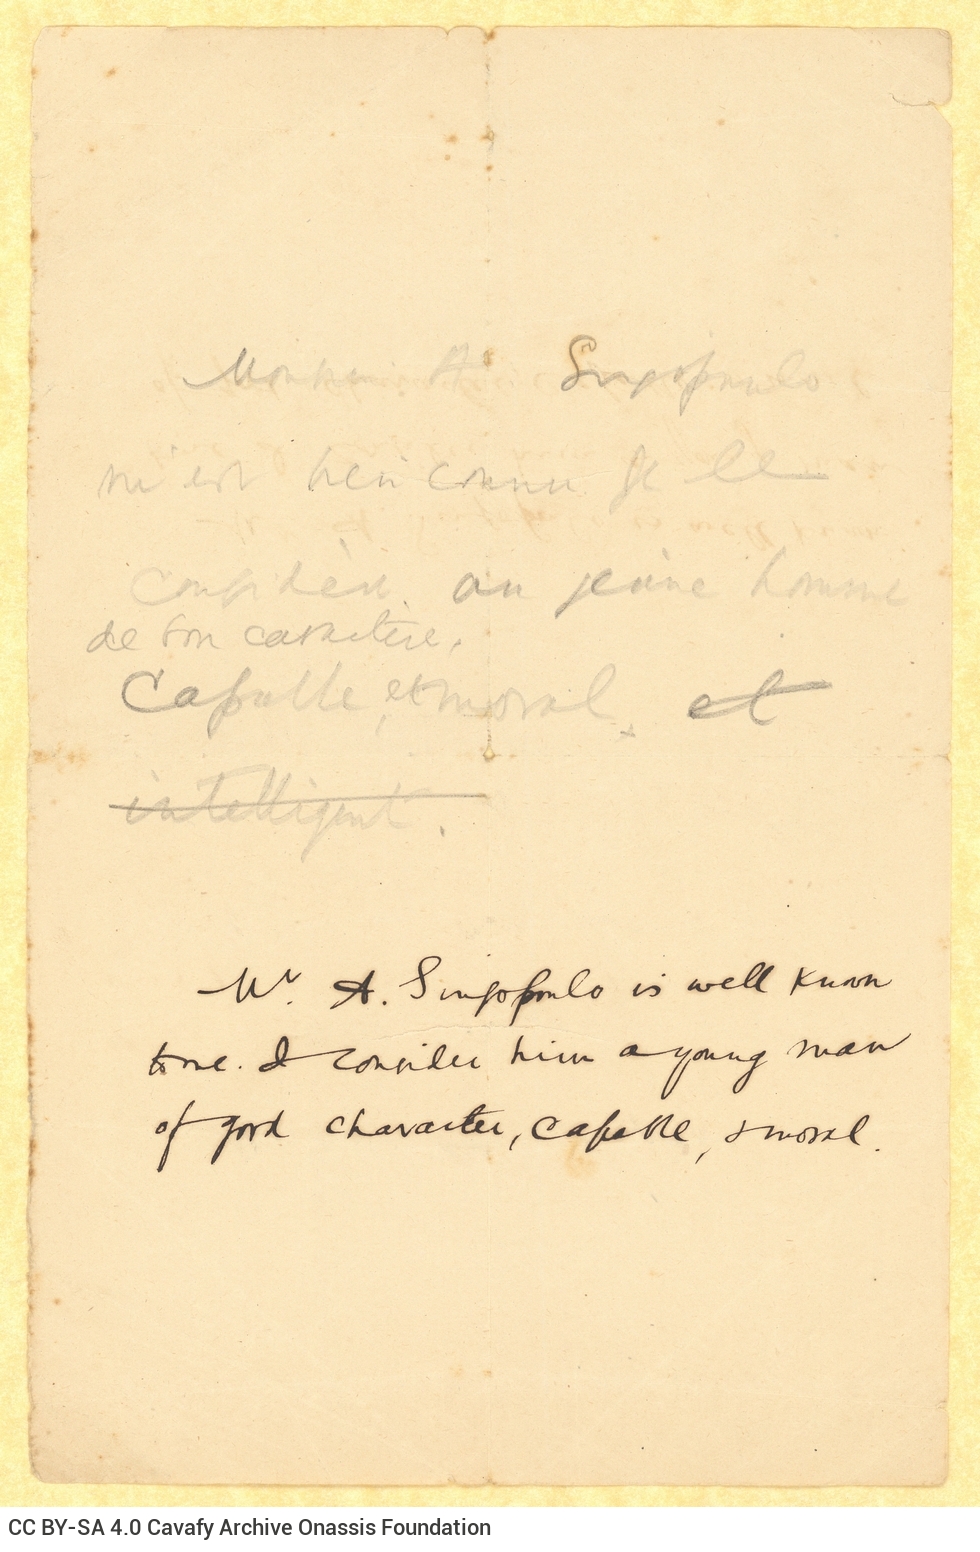 Handwritten recommendation note by C. P. Cavafy for Alekos Singopoulo.